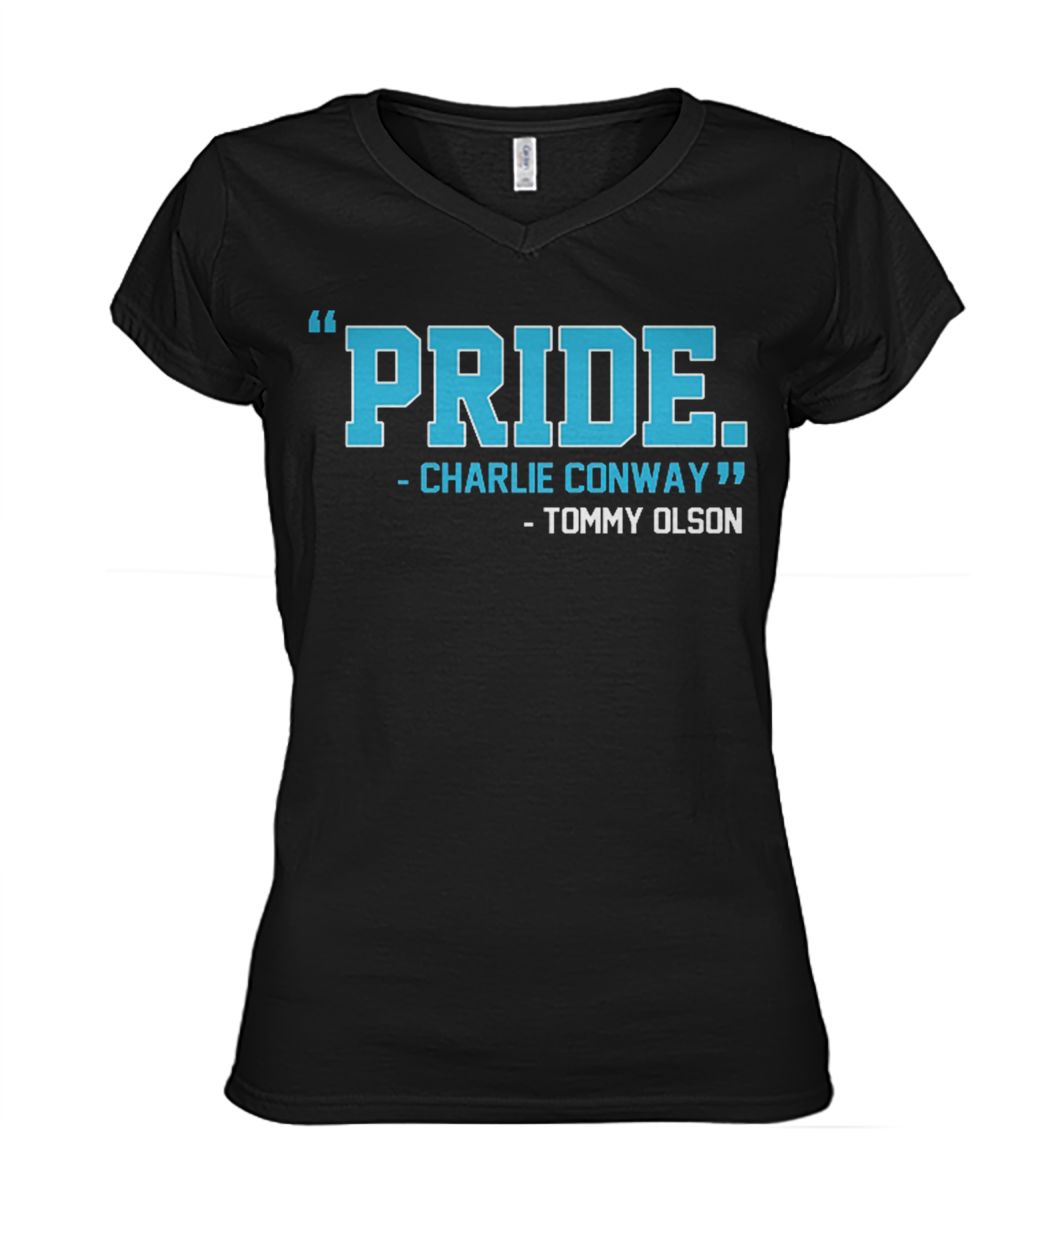 Pride charlie conway tommy olson women's v-neck